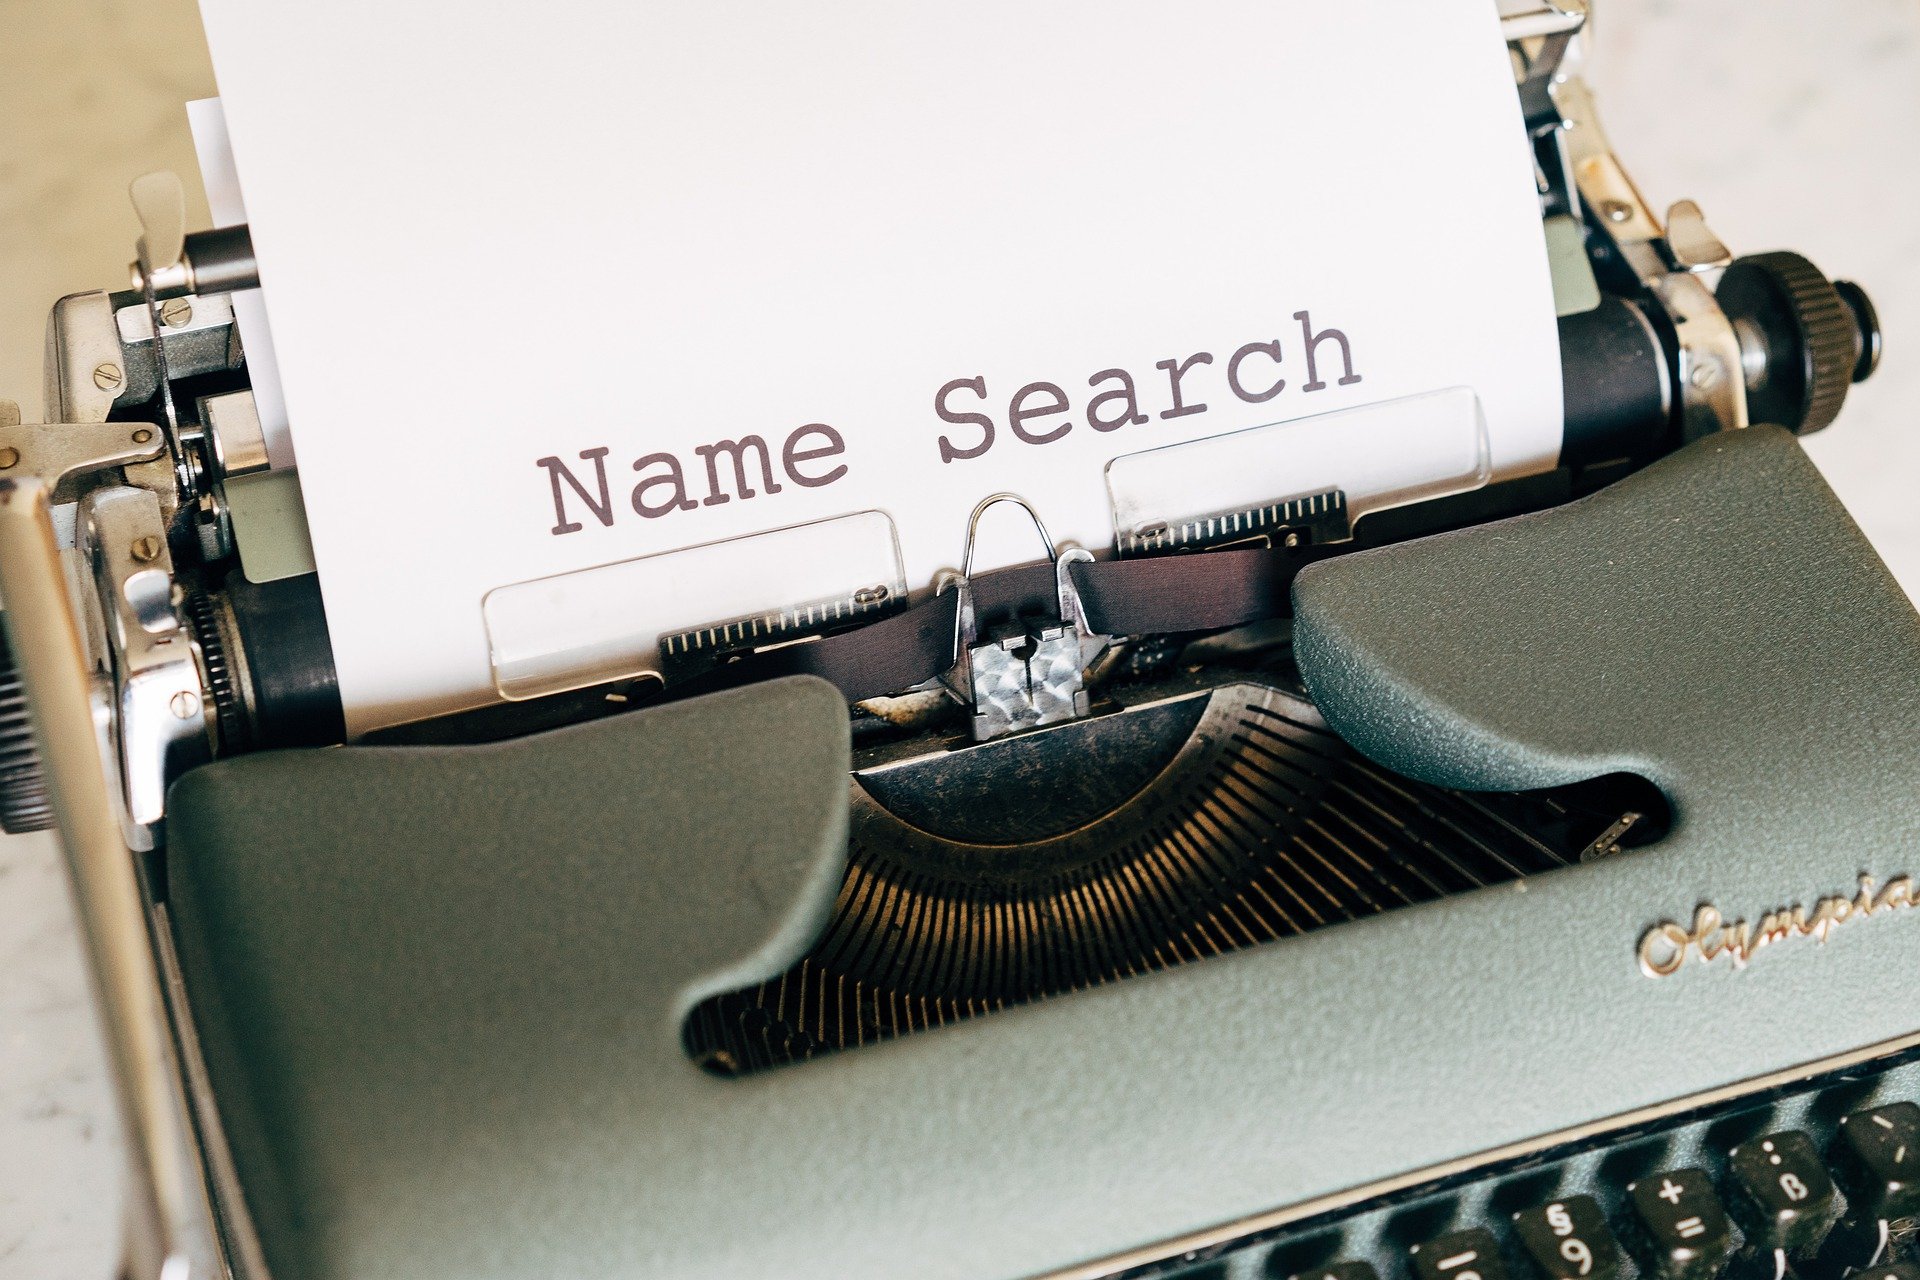 Name domain website search | Source: Pixabay